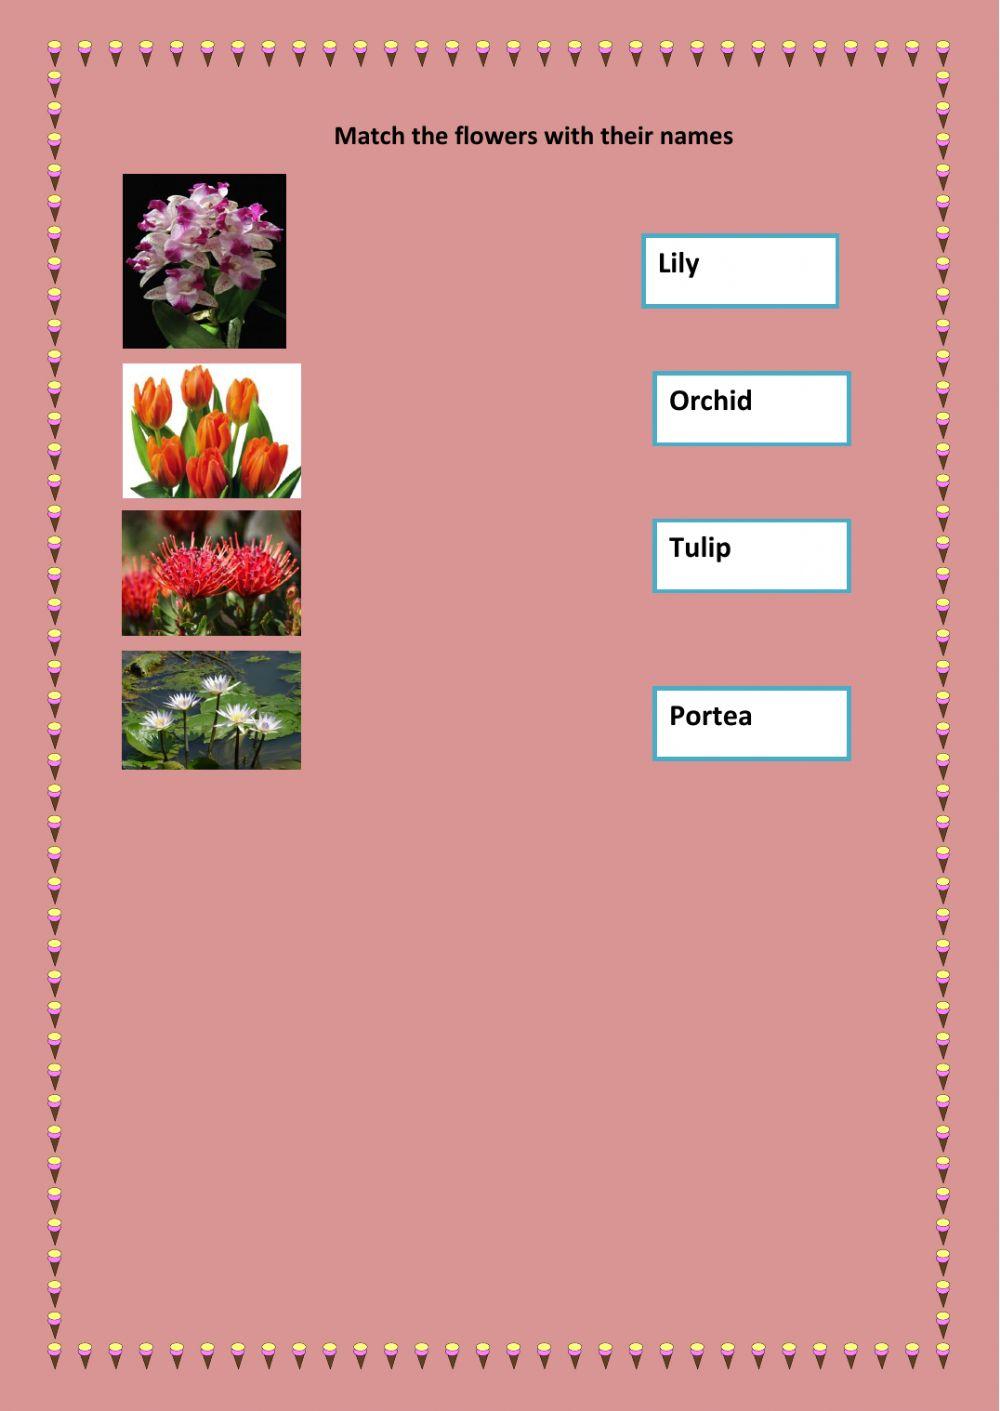 match the flowers with their names